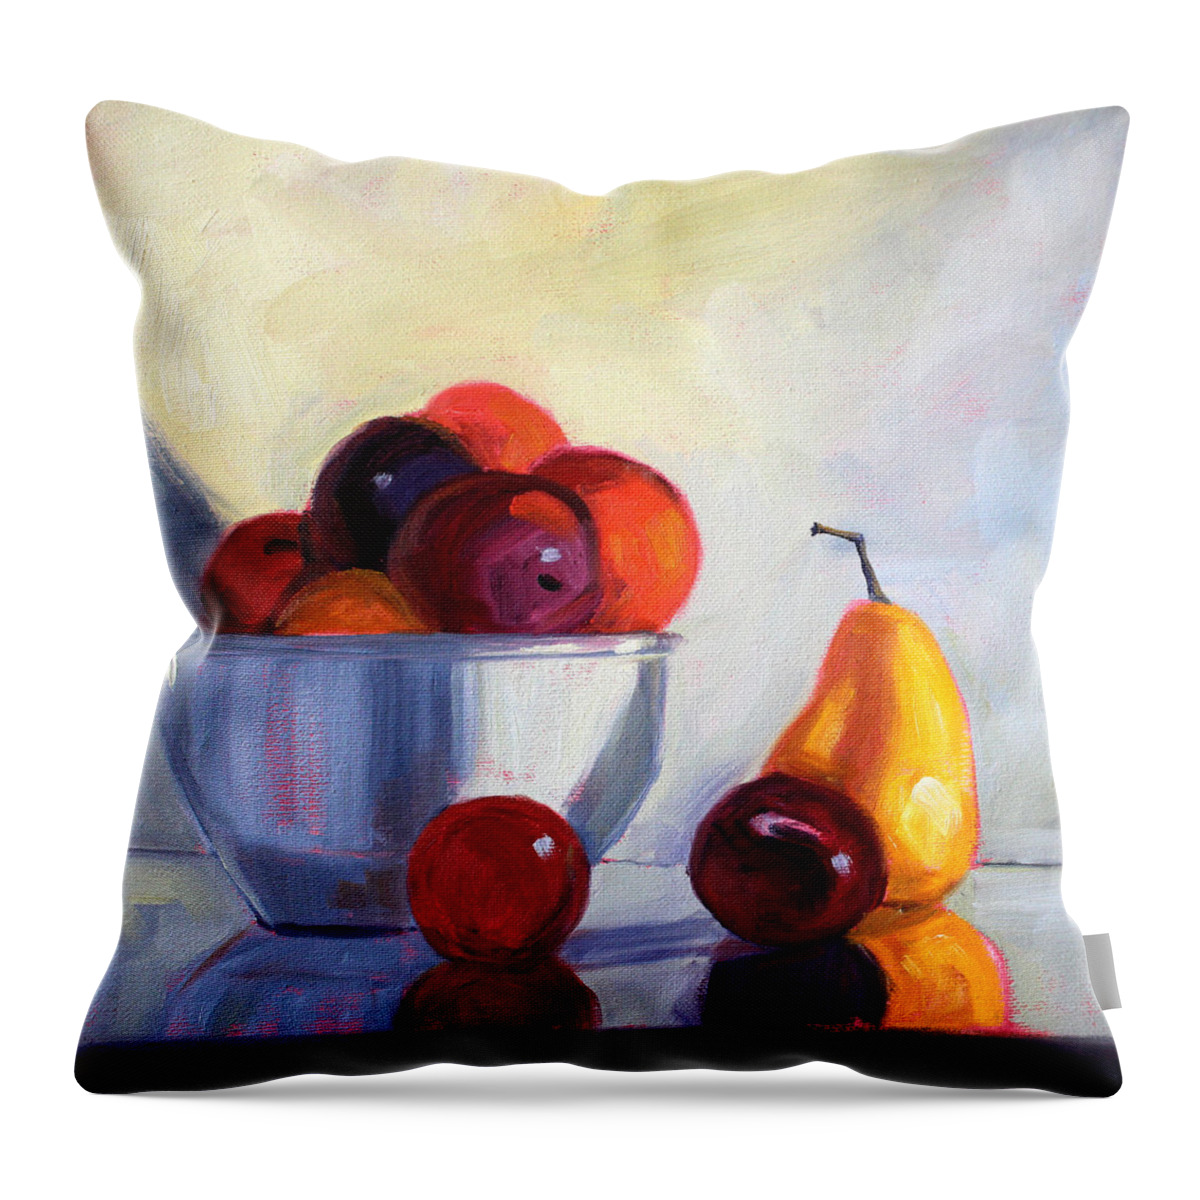 Fruit Throw Pillow featuring the painting Fruit Bowl by Nancy Merkle